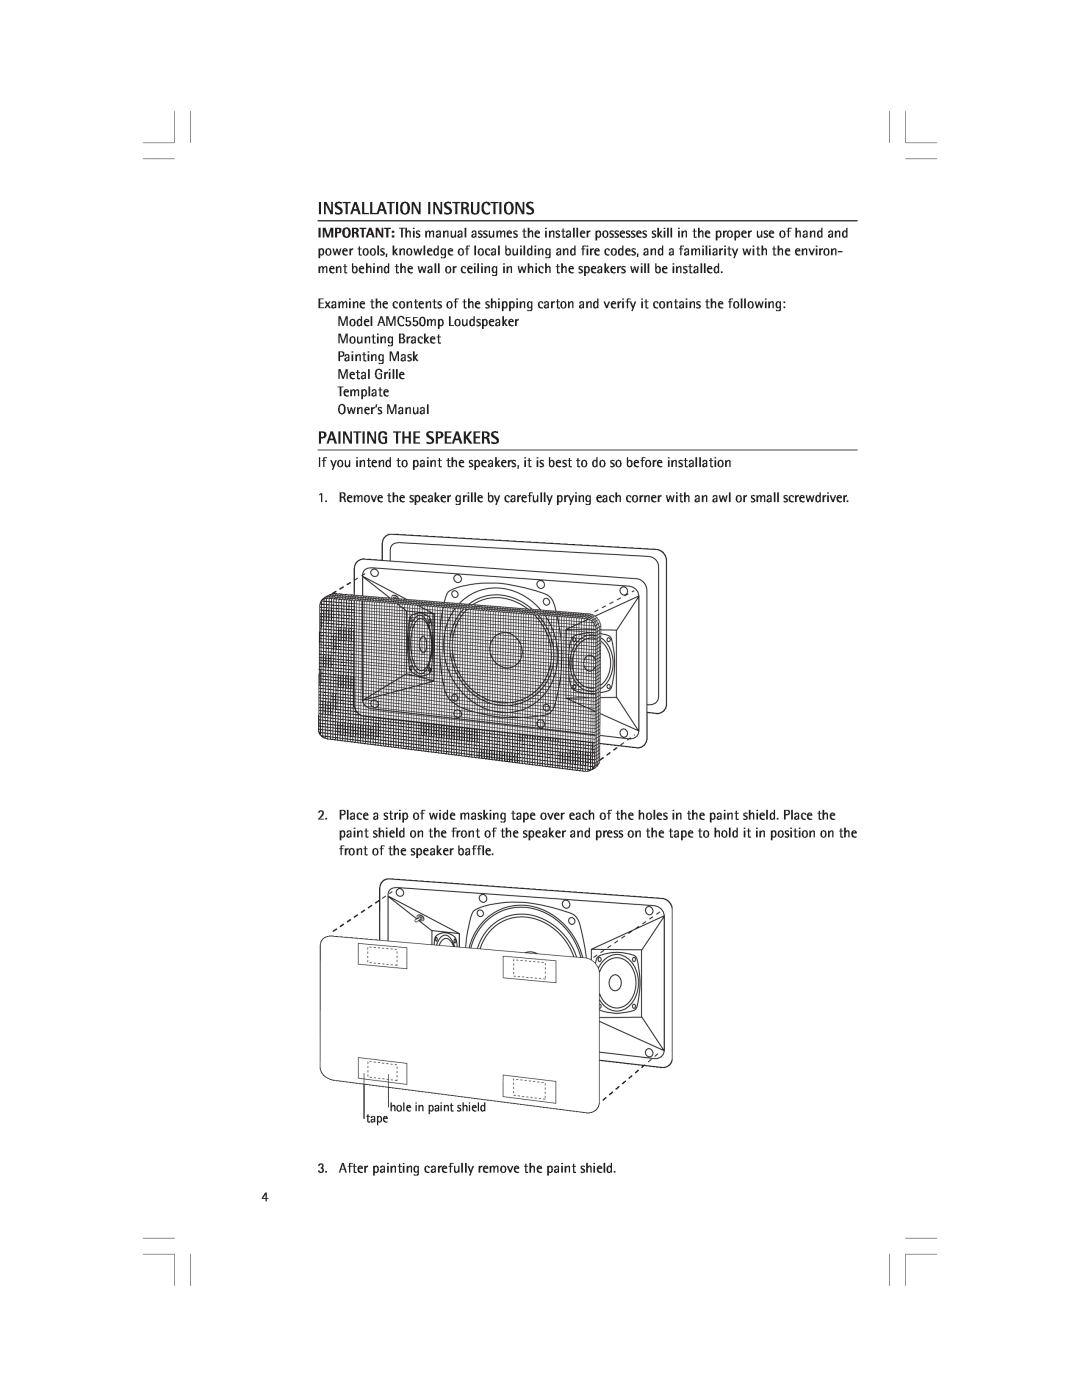 Snell Acoustics AMC550mp owner manual Installation Instructions, Painting The Speakers 